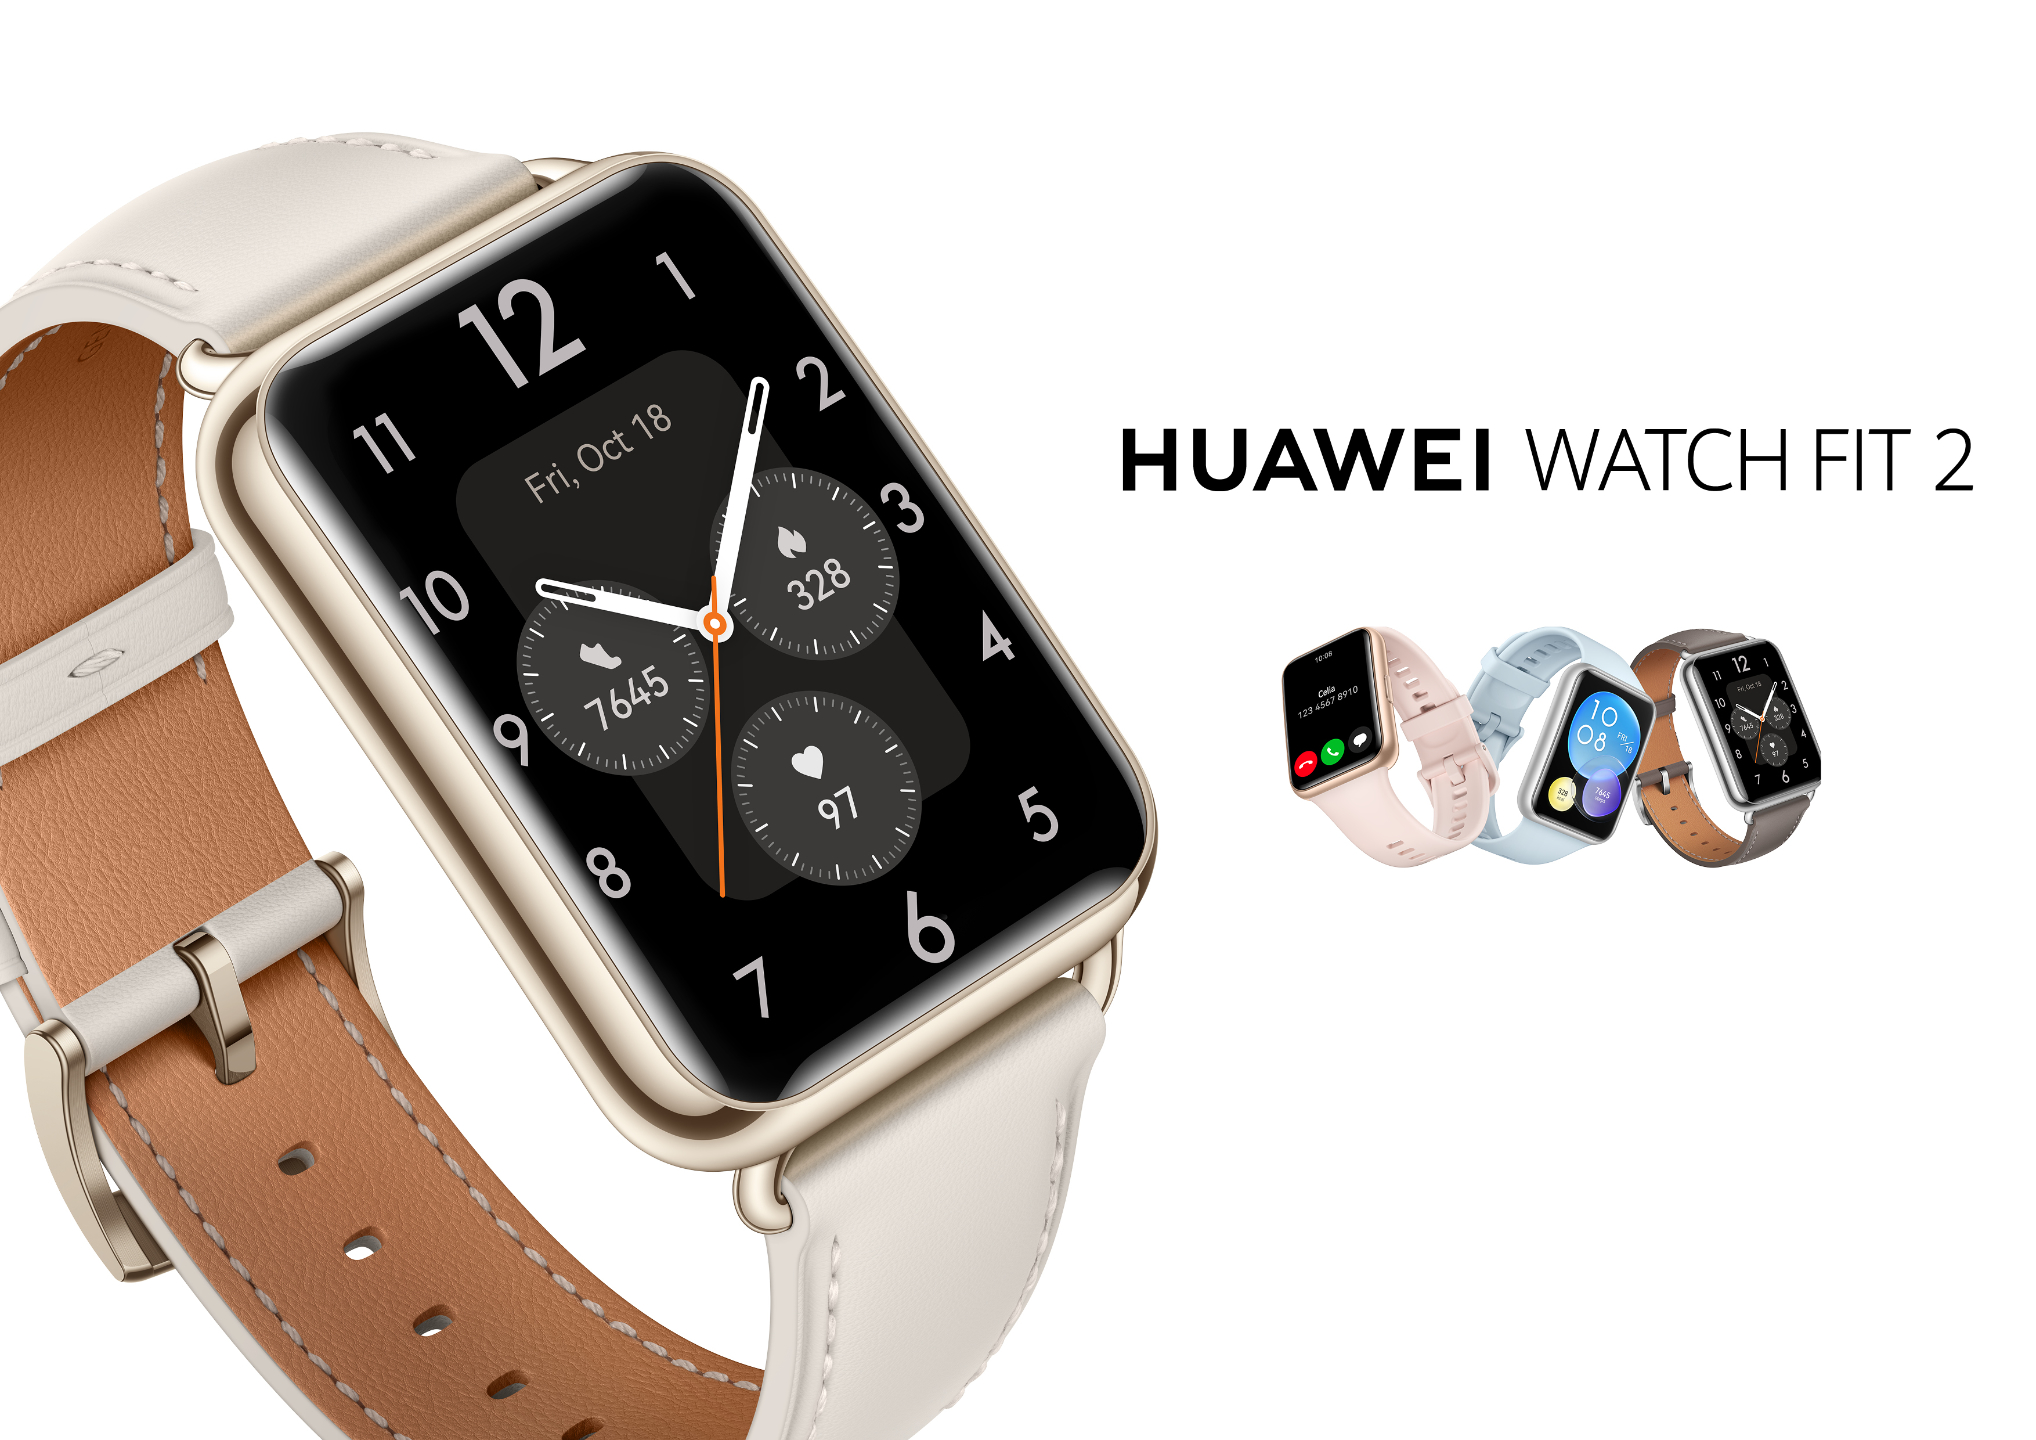 Huawei Watch Fit 2 Classic - full specs, details and review